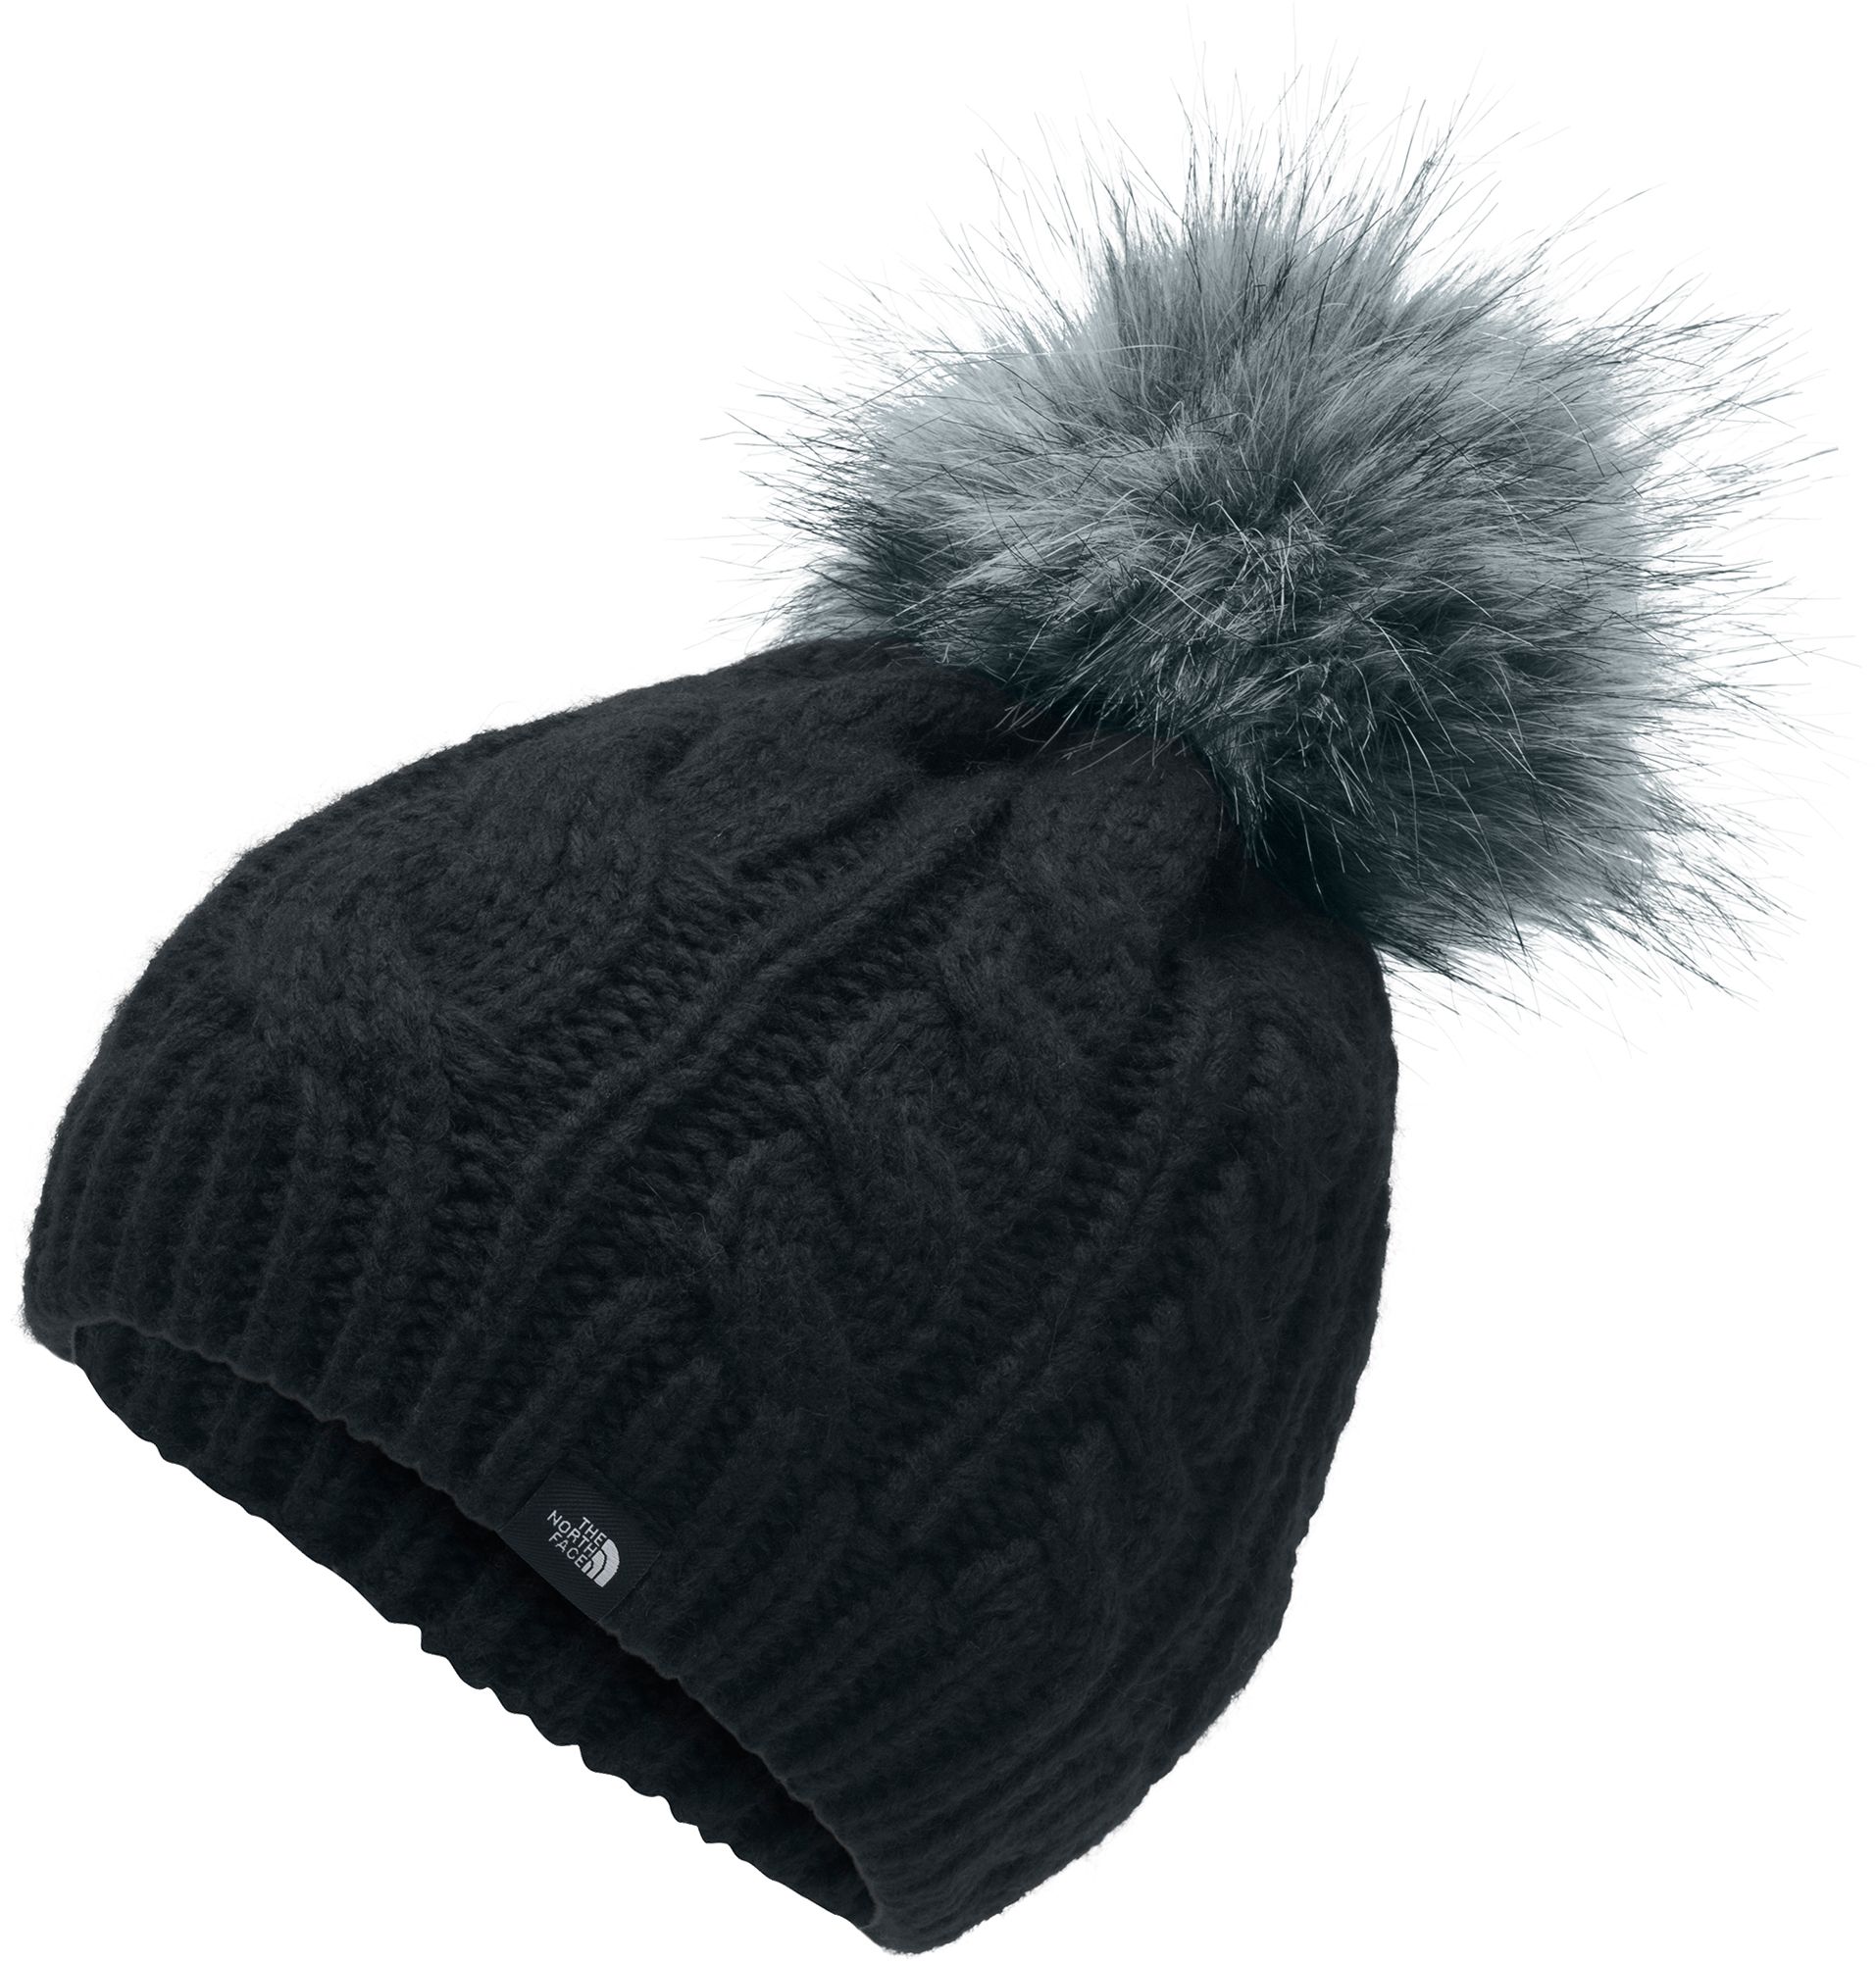 north face hat with pom pom